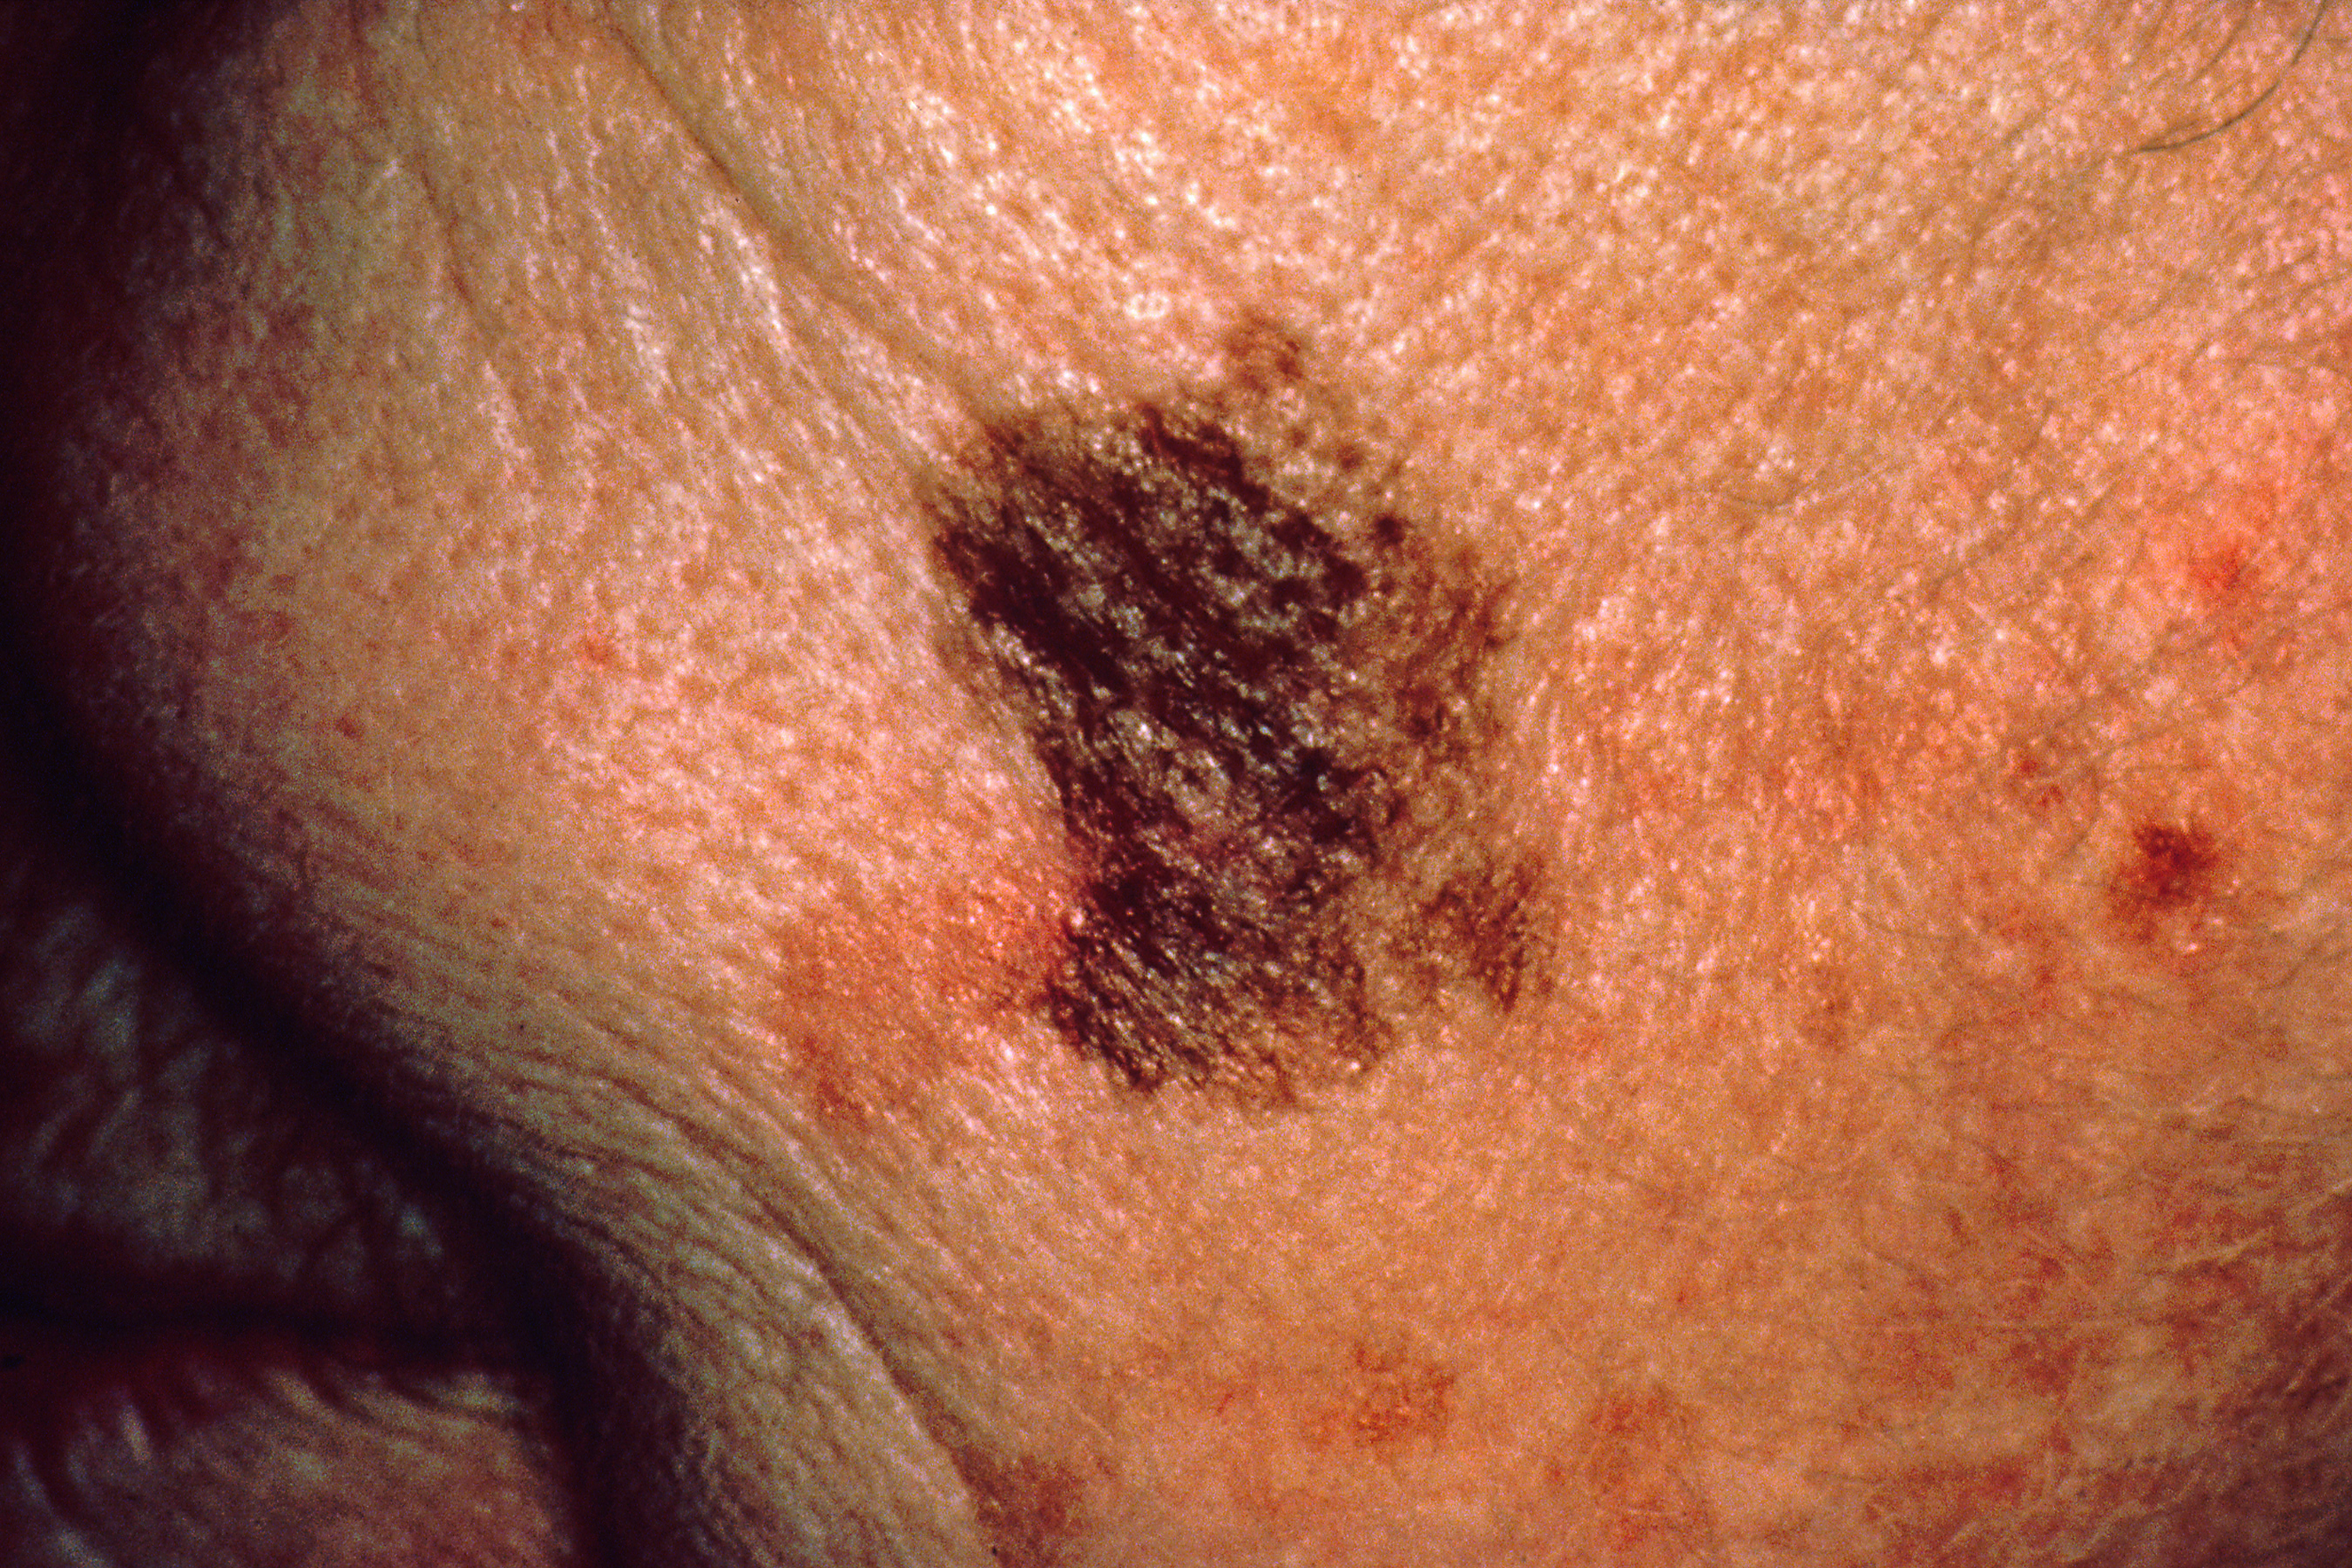 Oncology Pharmacists Are Crucial in Skin Cancer Management